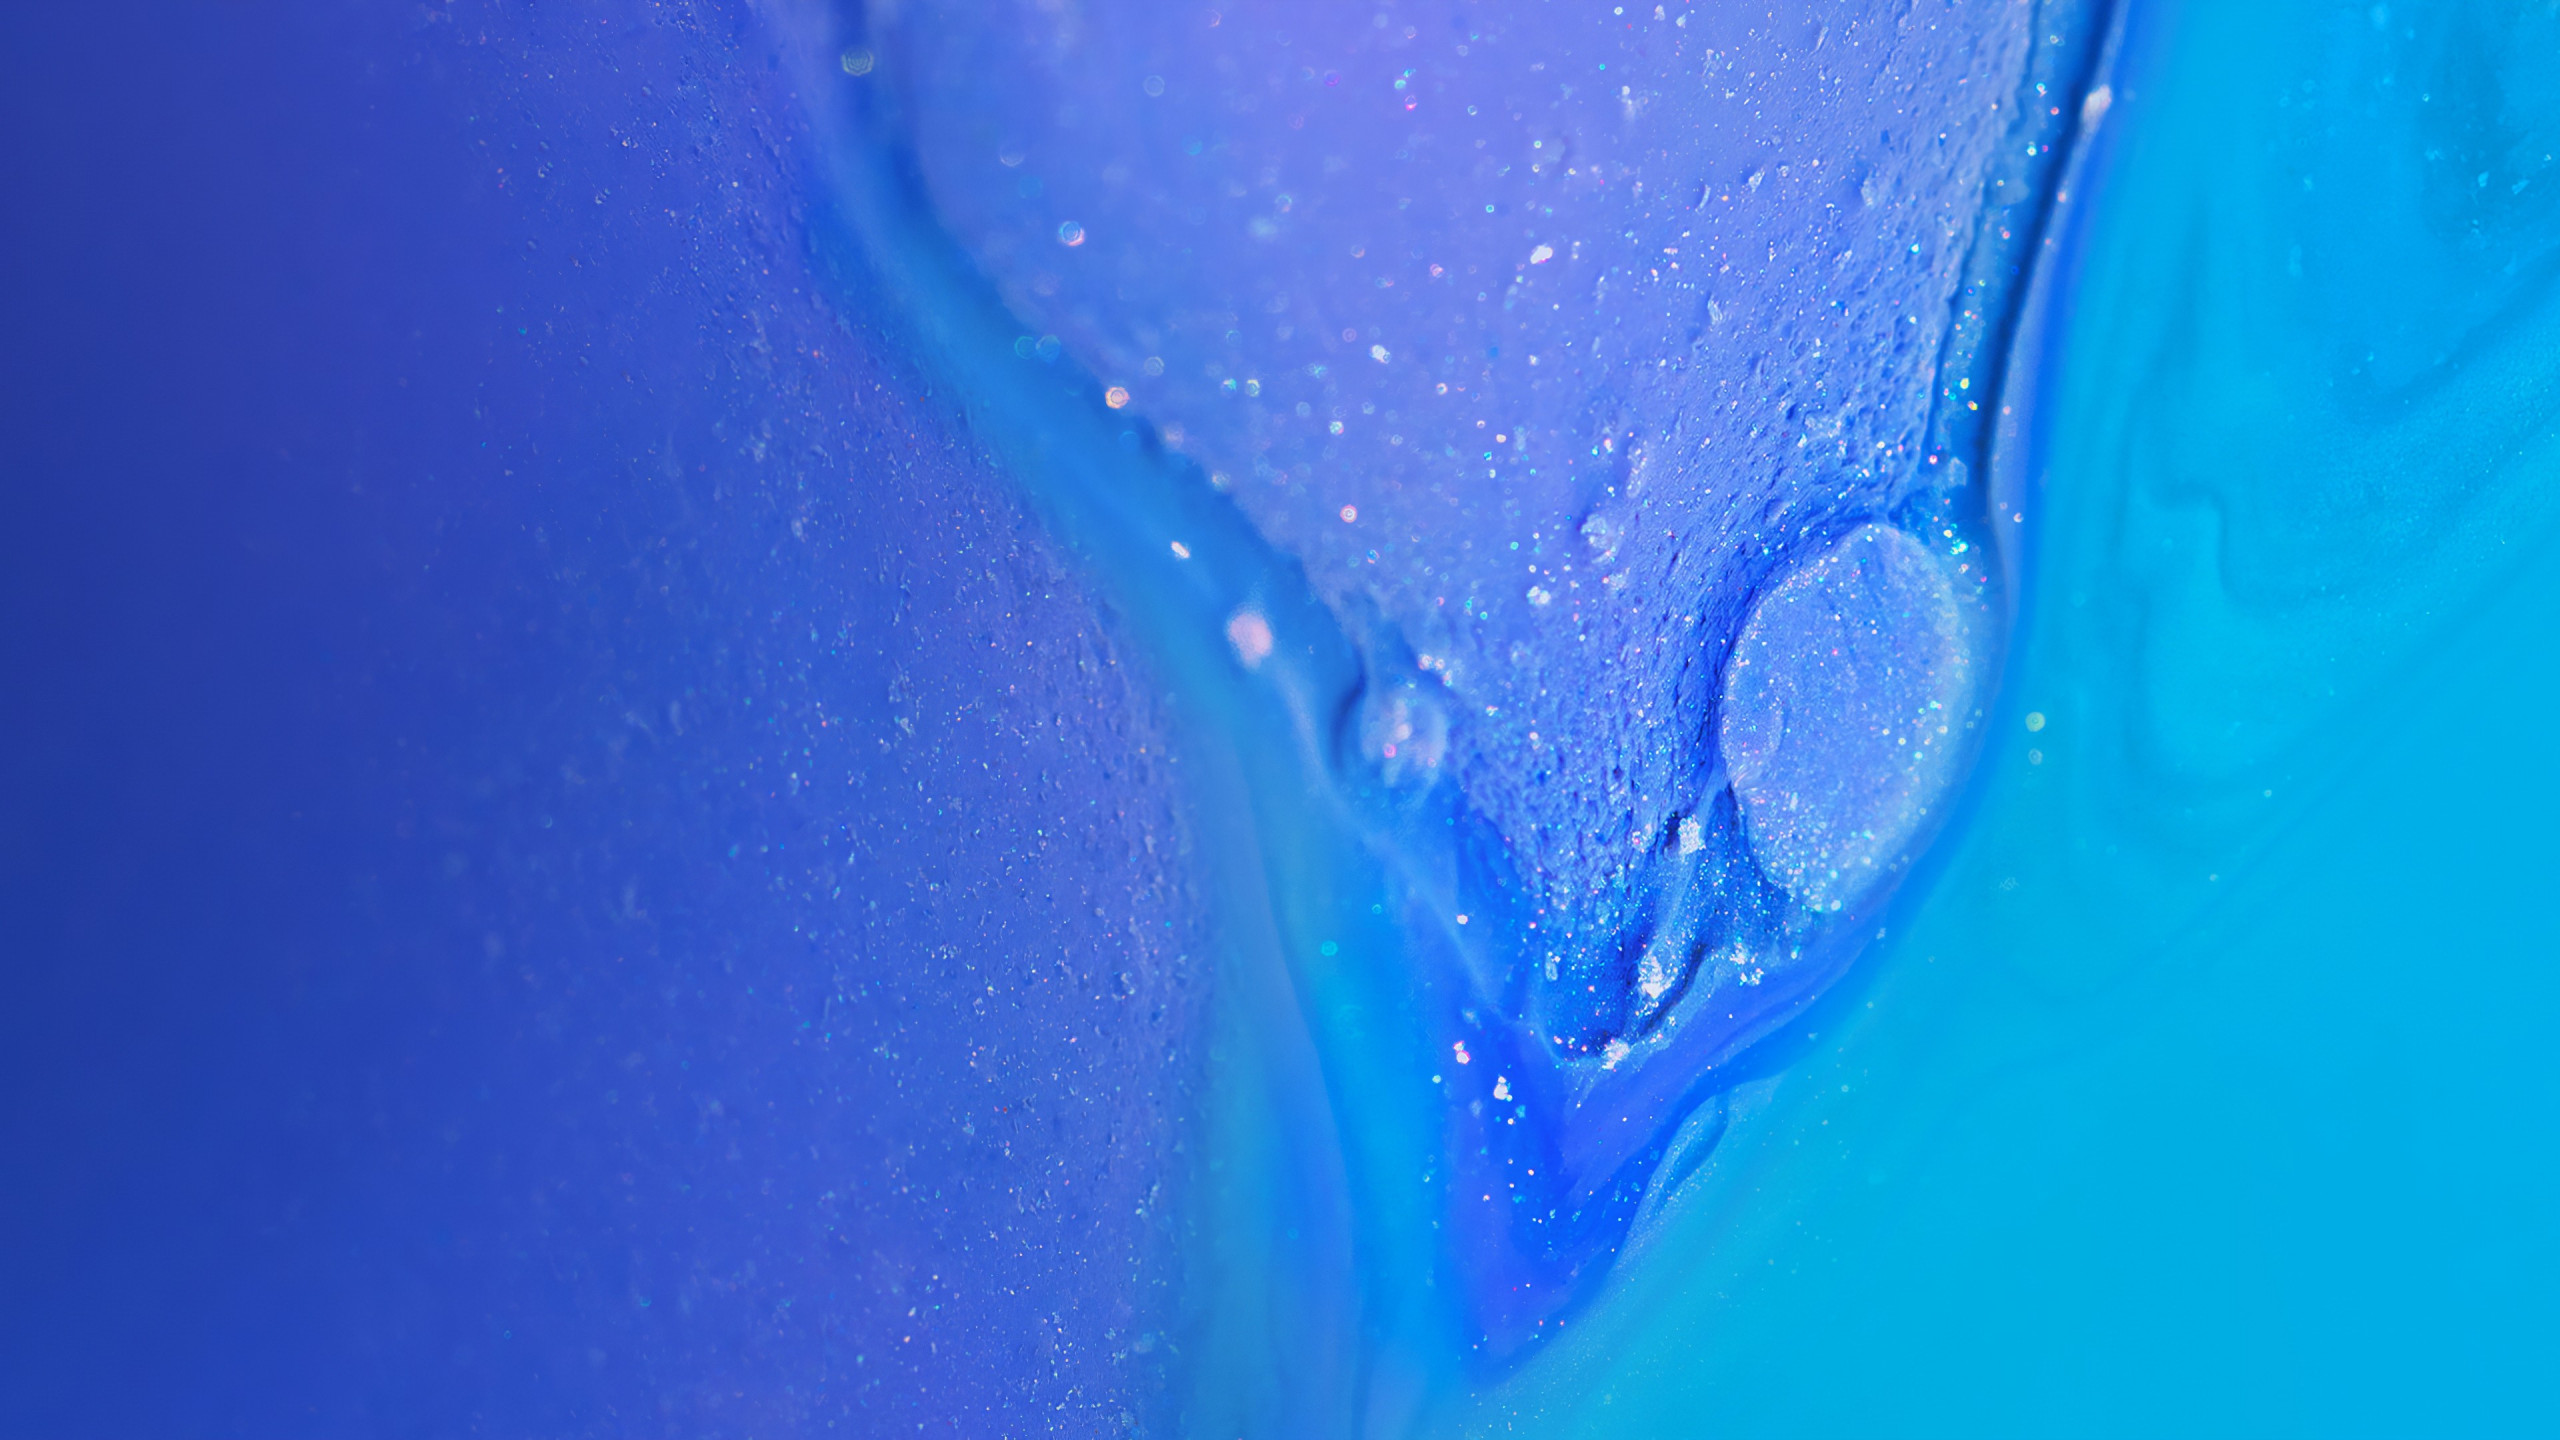 The blue abstract wallpaper 2560x1440